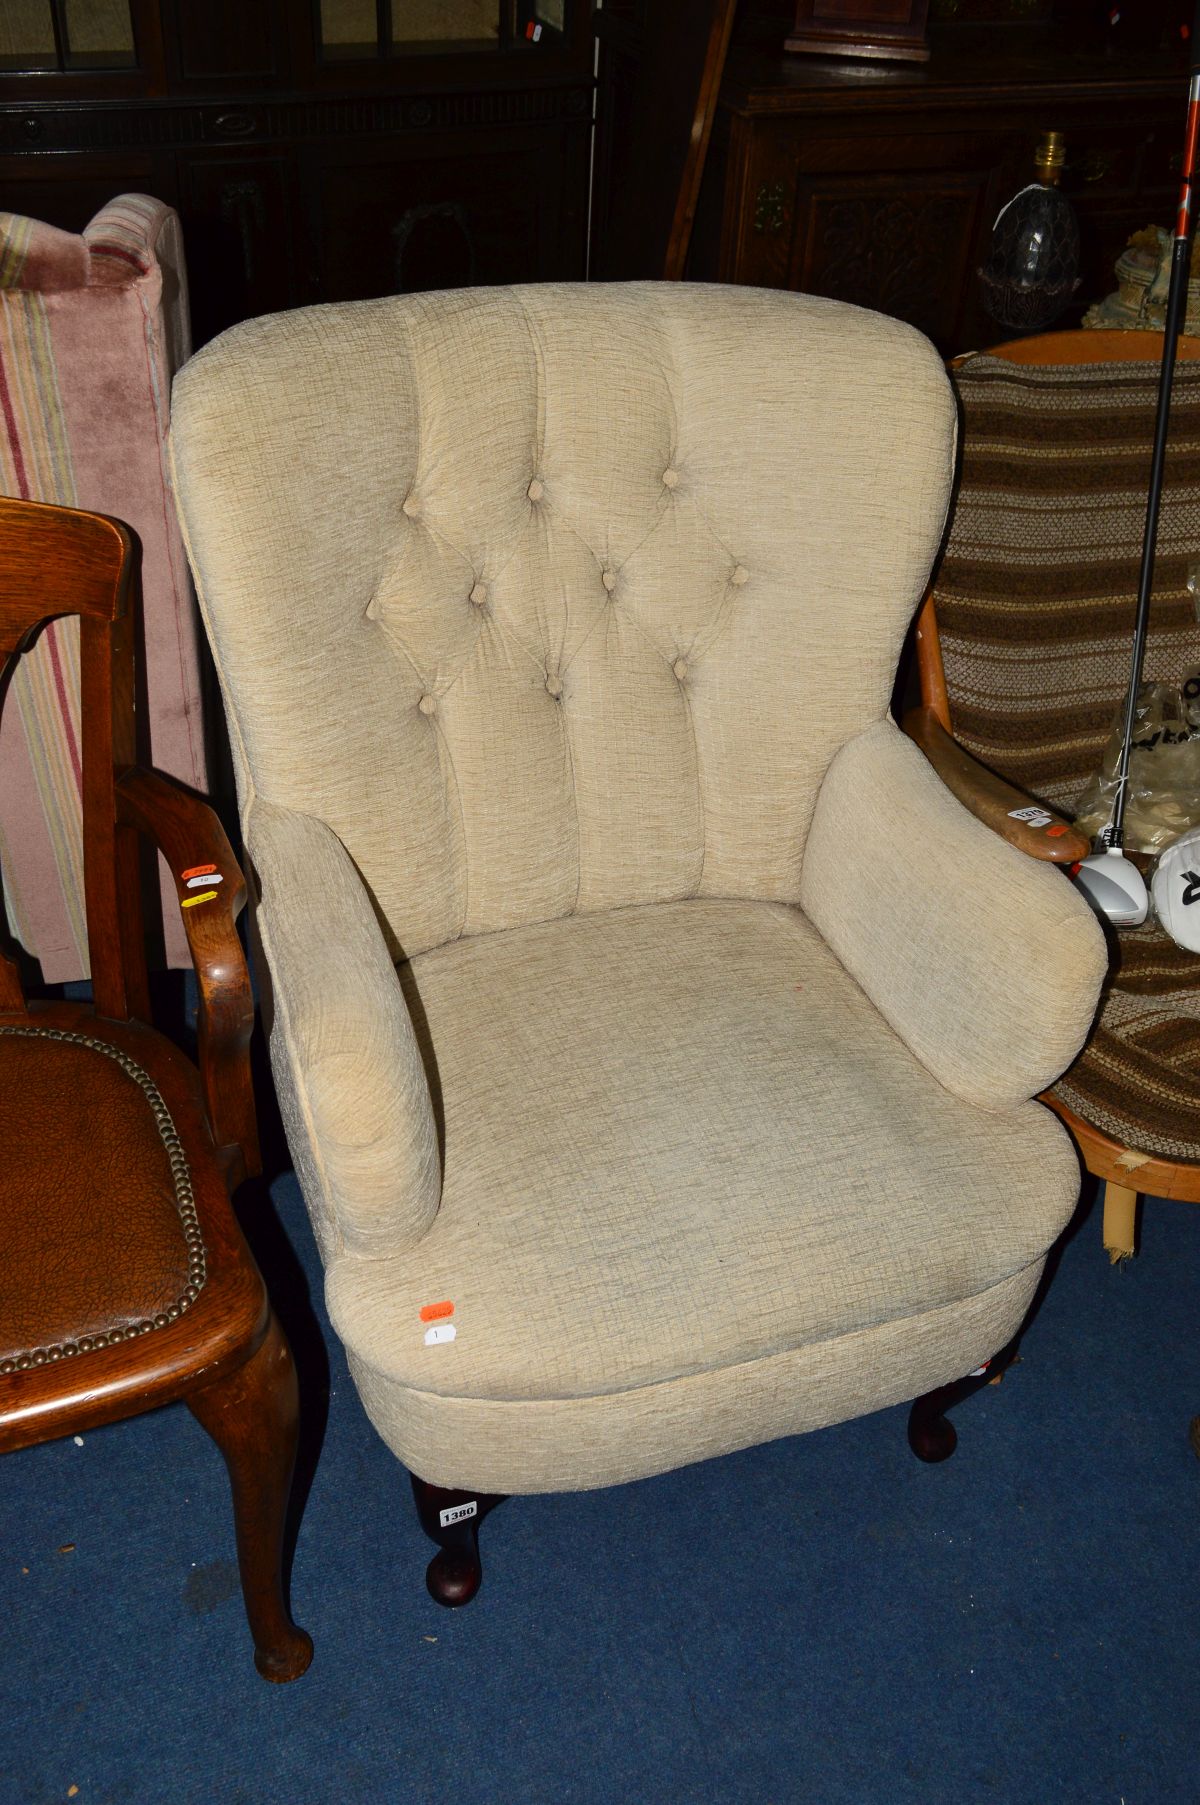 A MODERN OATMEAL UPHOLSTERED ARMCHAIR, with a buttoned back